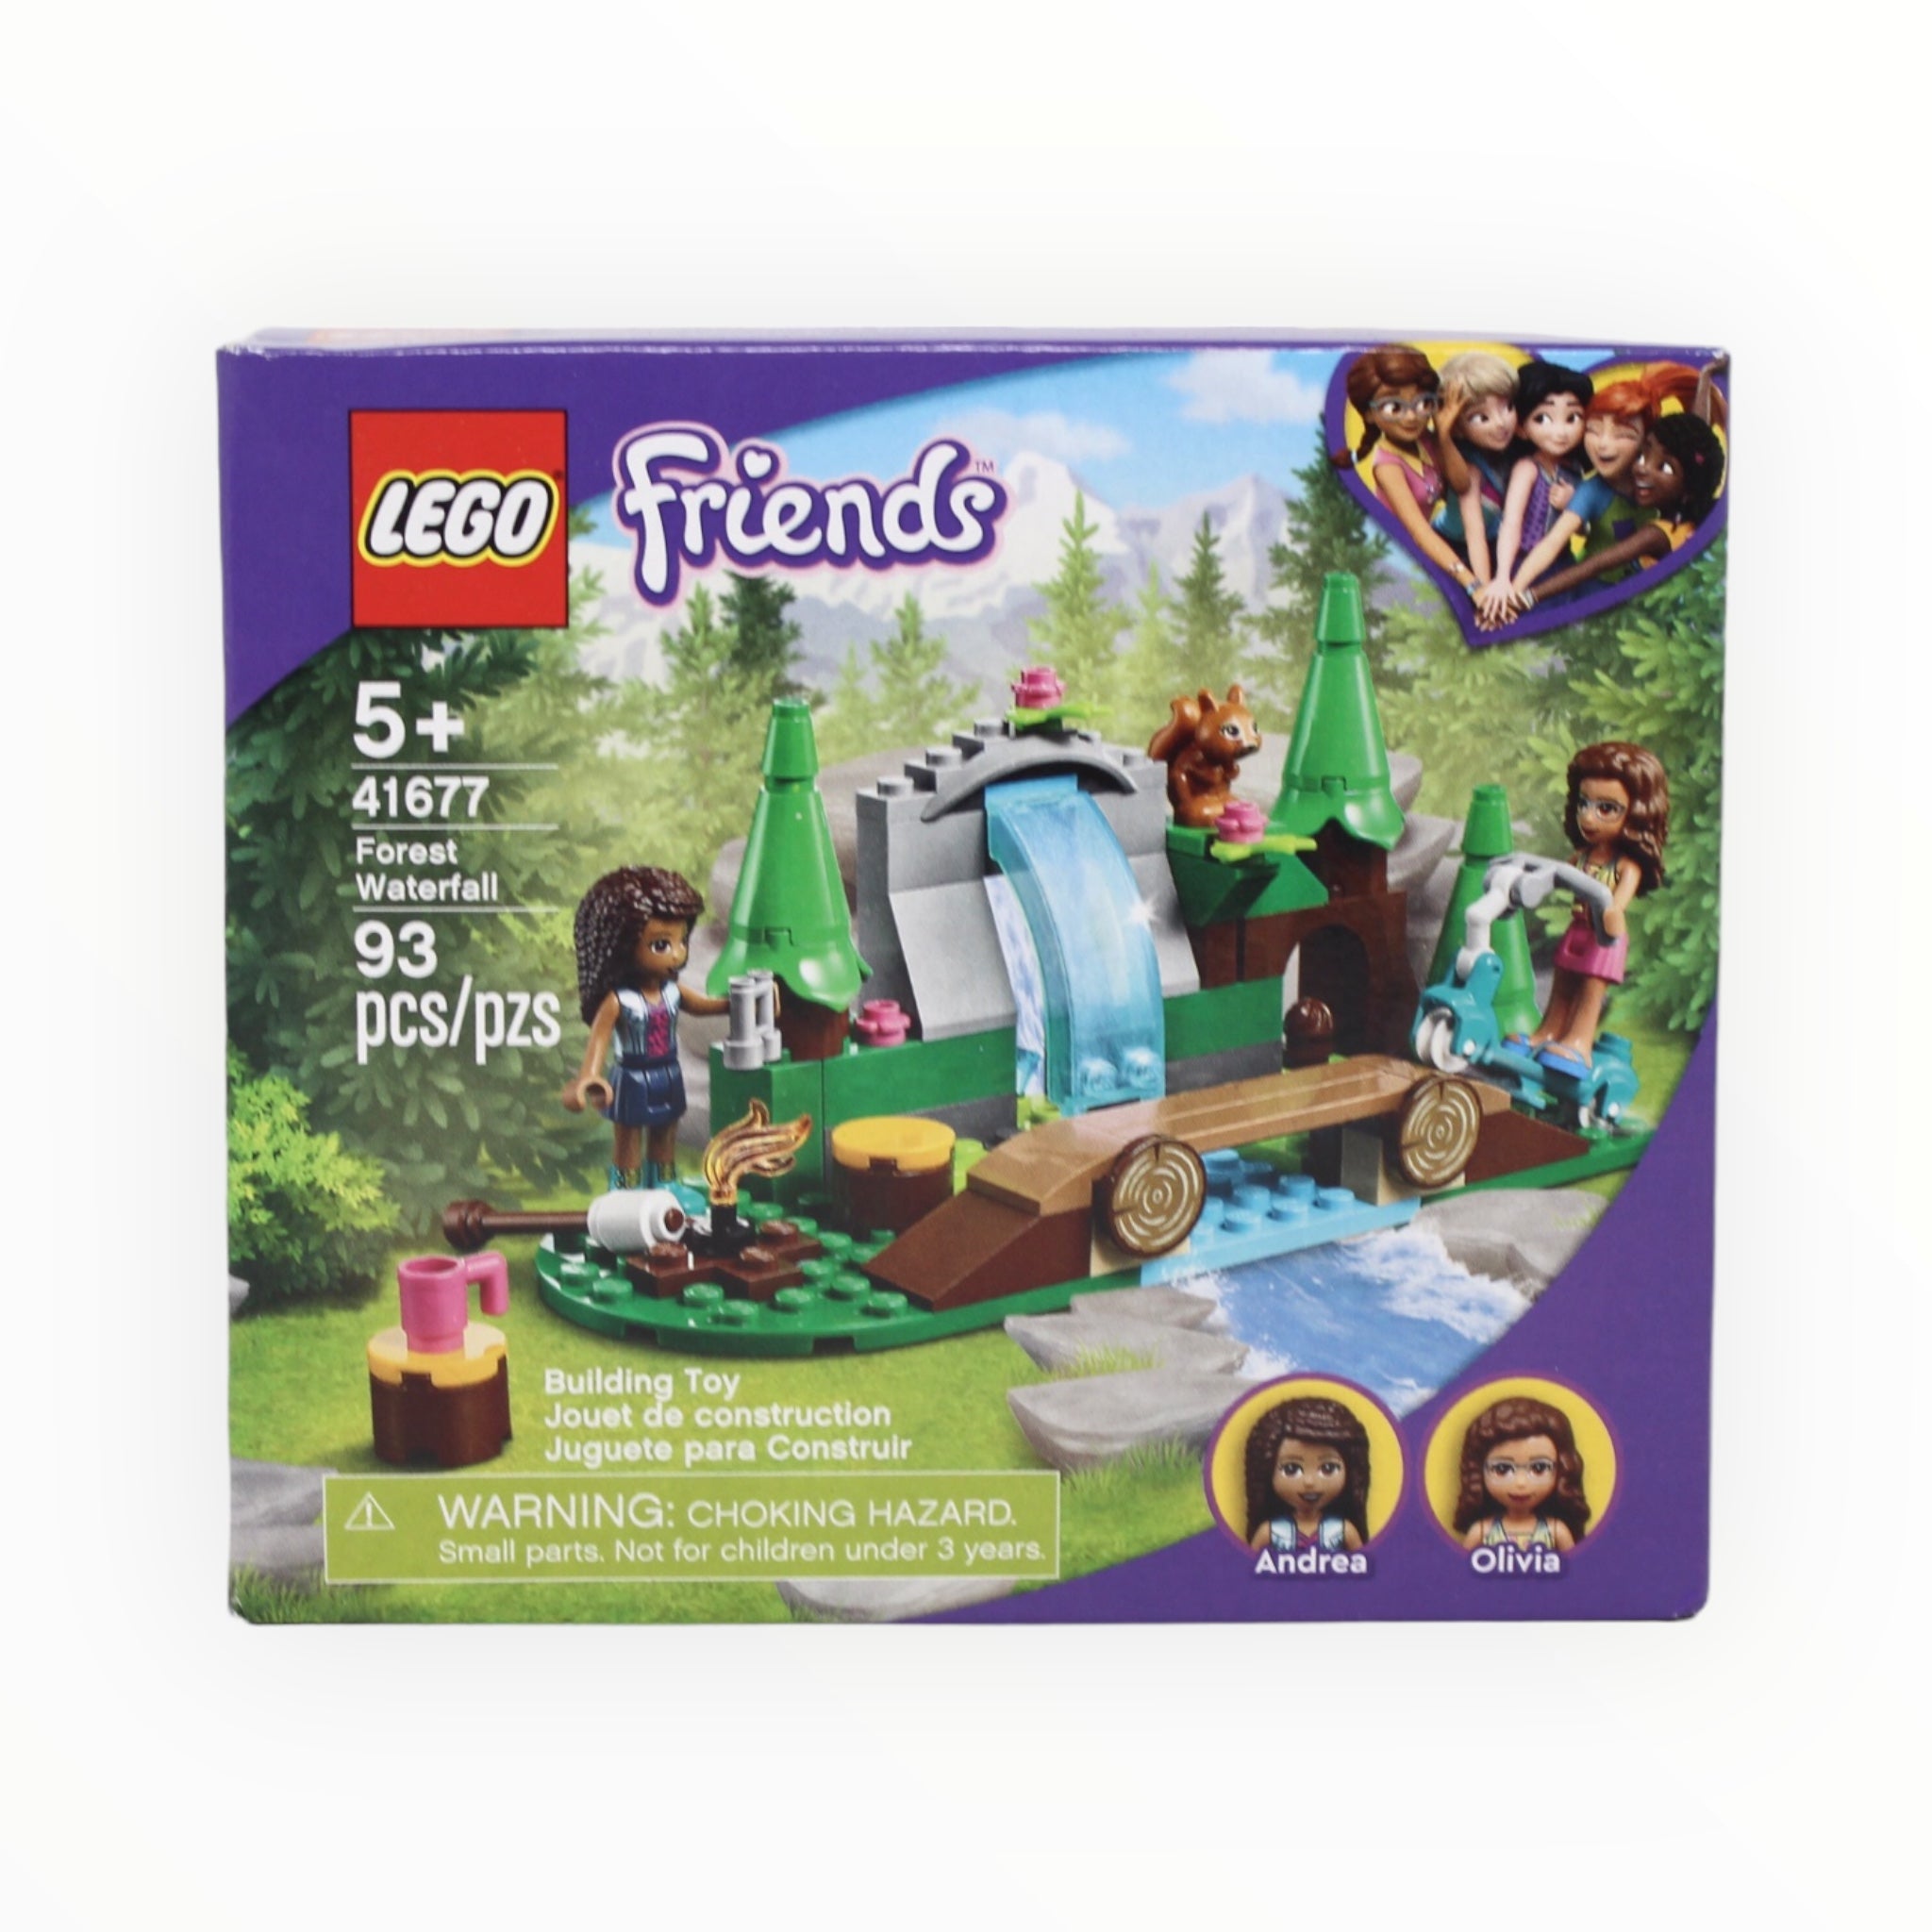 Retired Set 41677 Friends Forest Waterfall